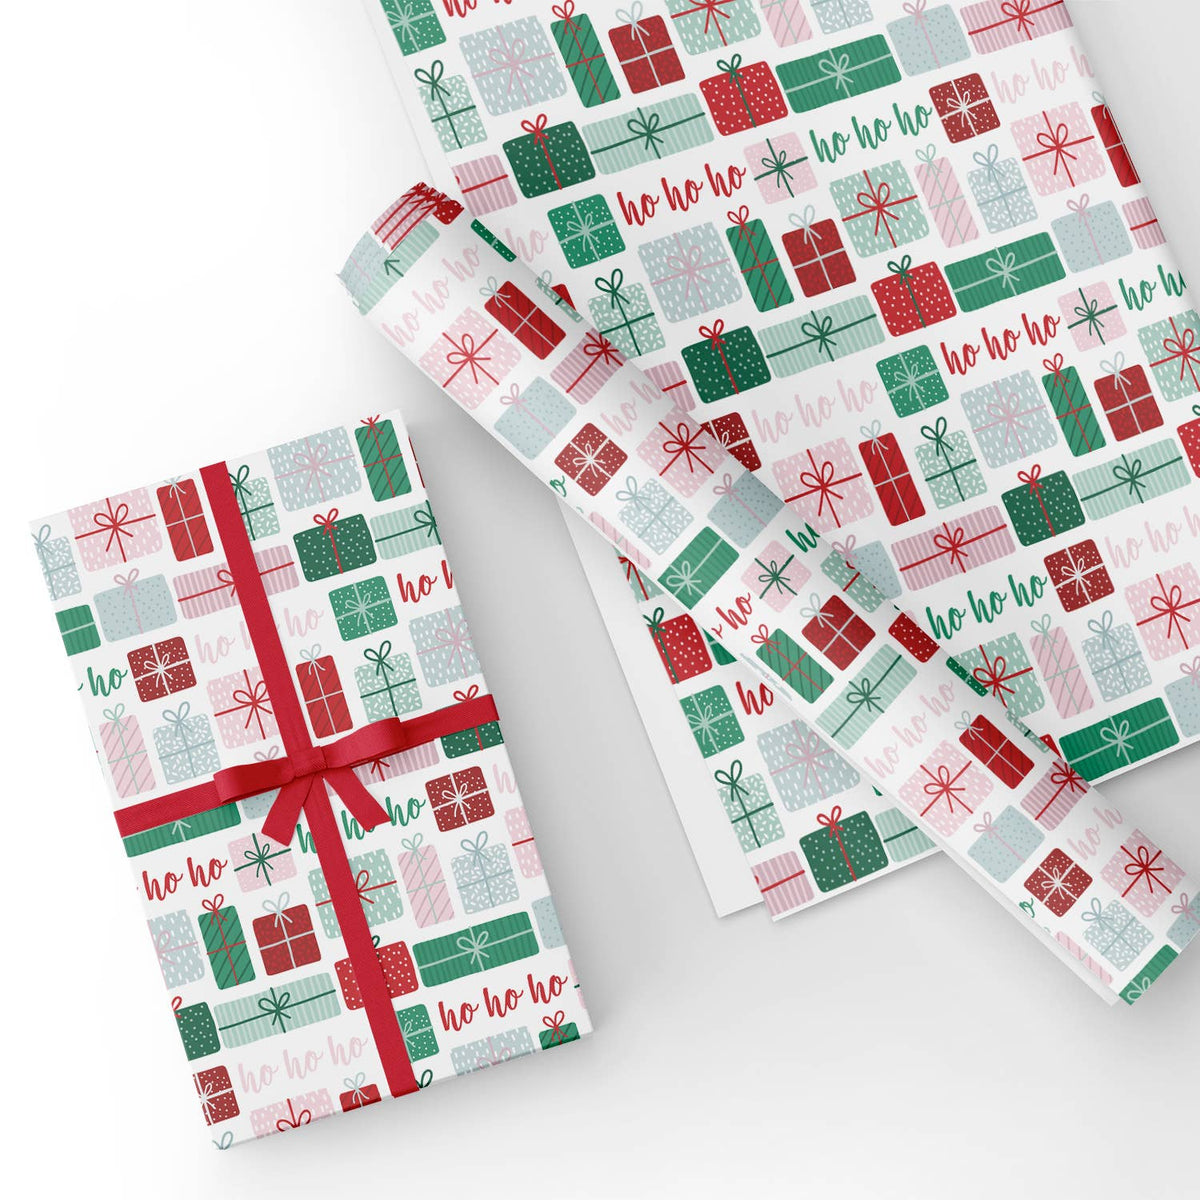  Homeral Gift Wrapping Paper 6 Sheets-27.6 x 19.7